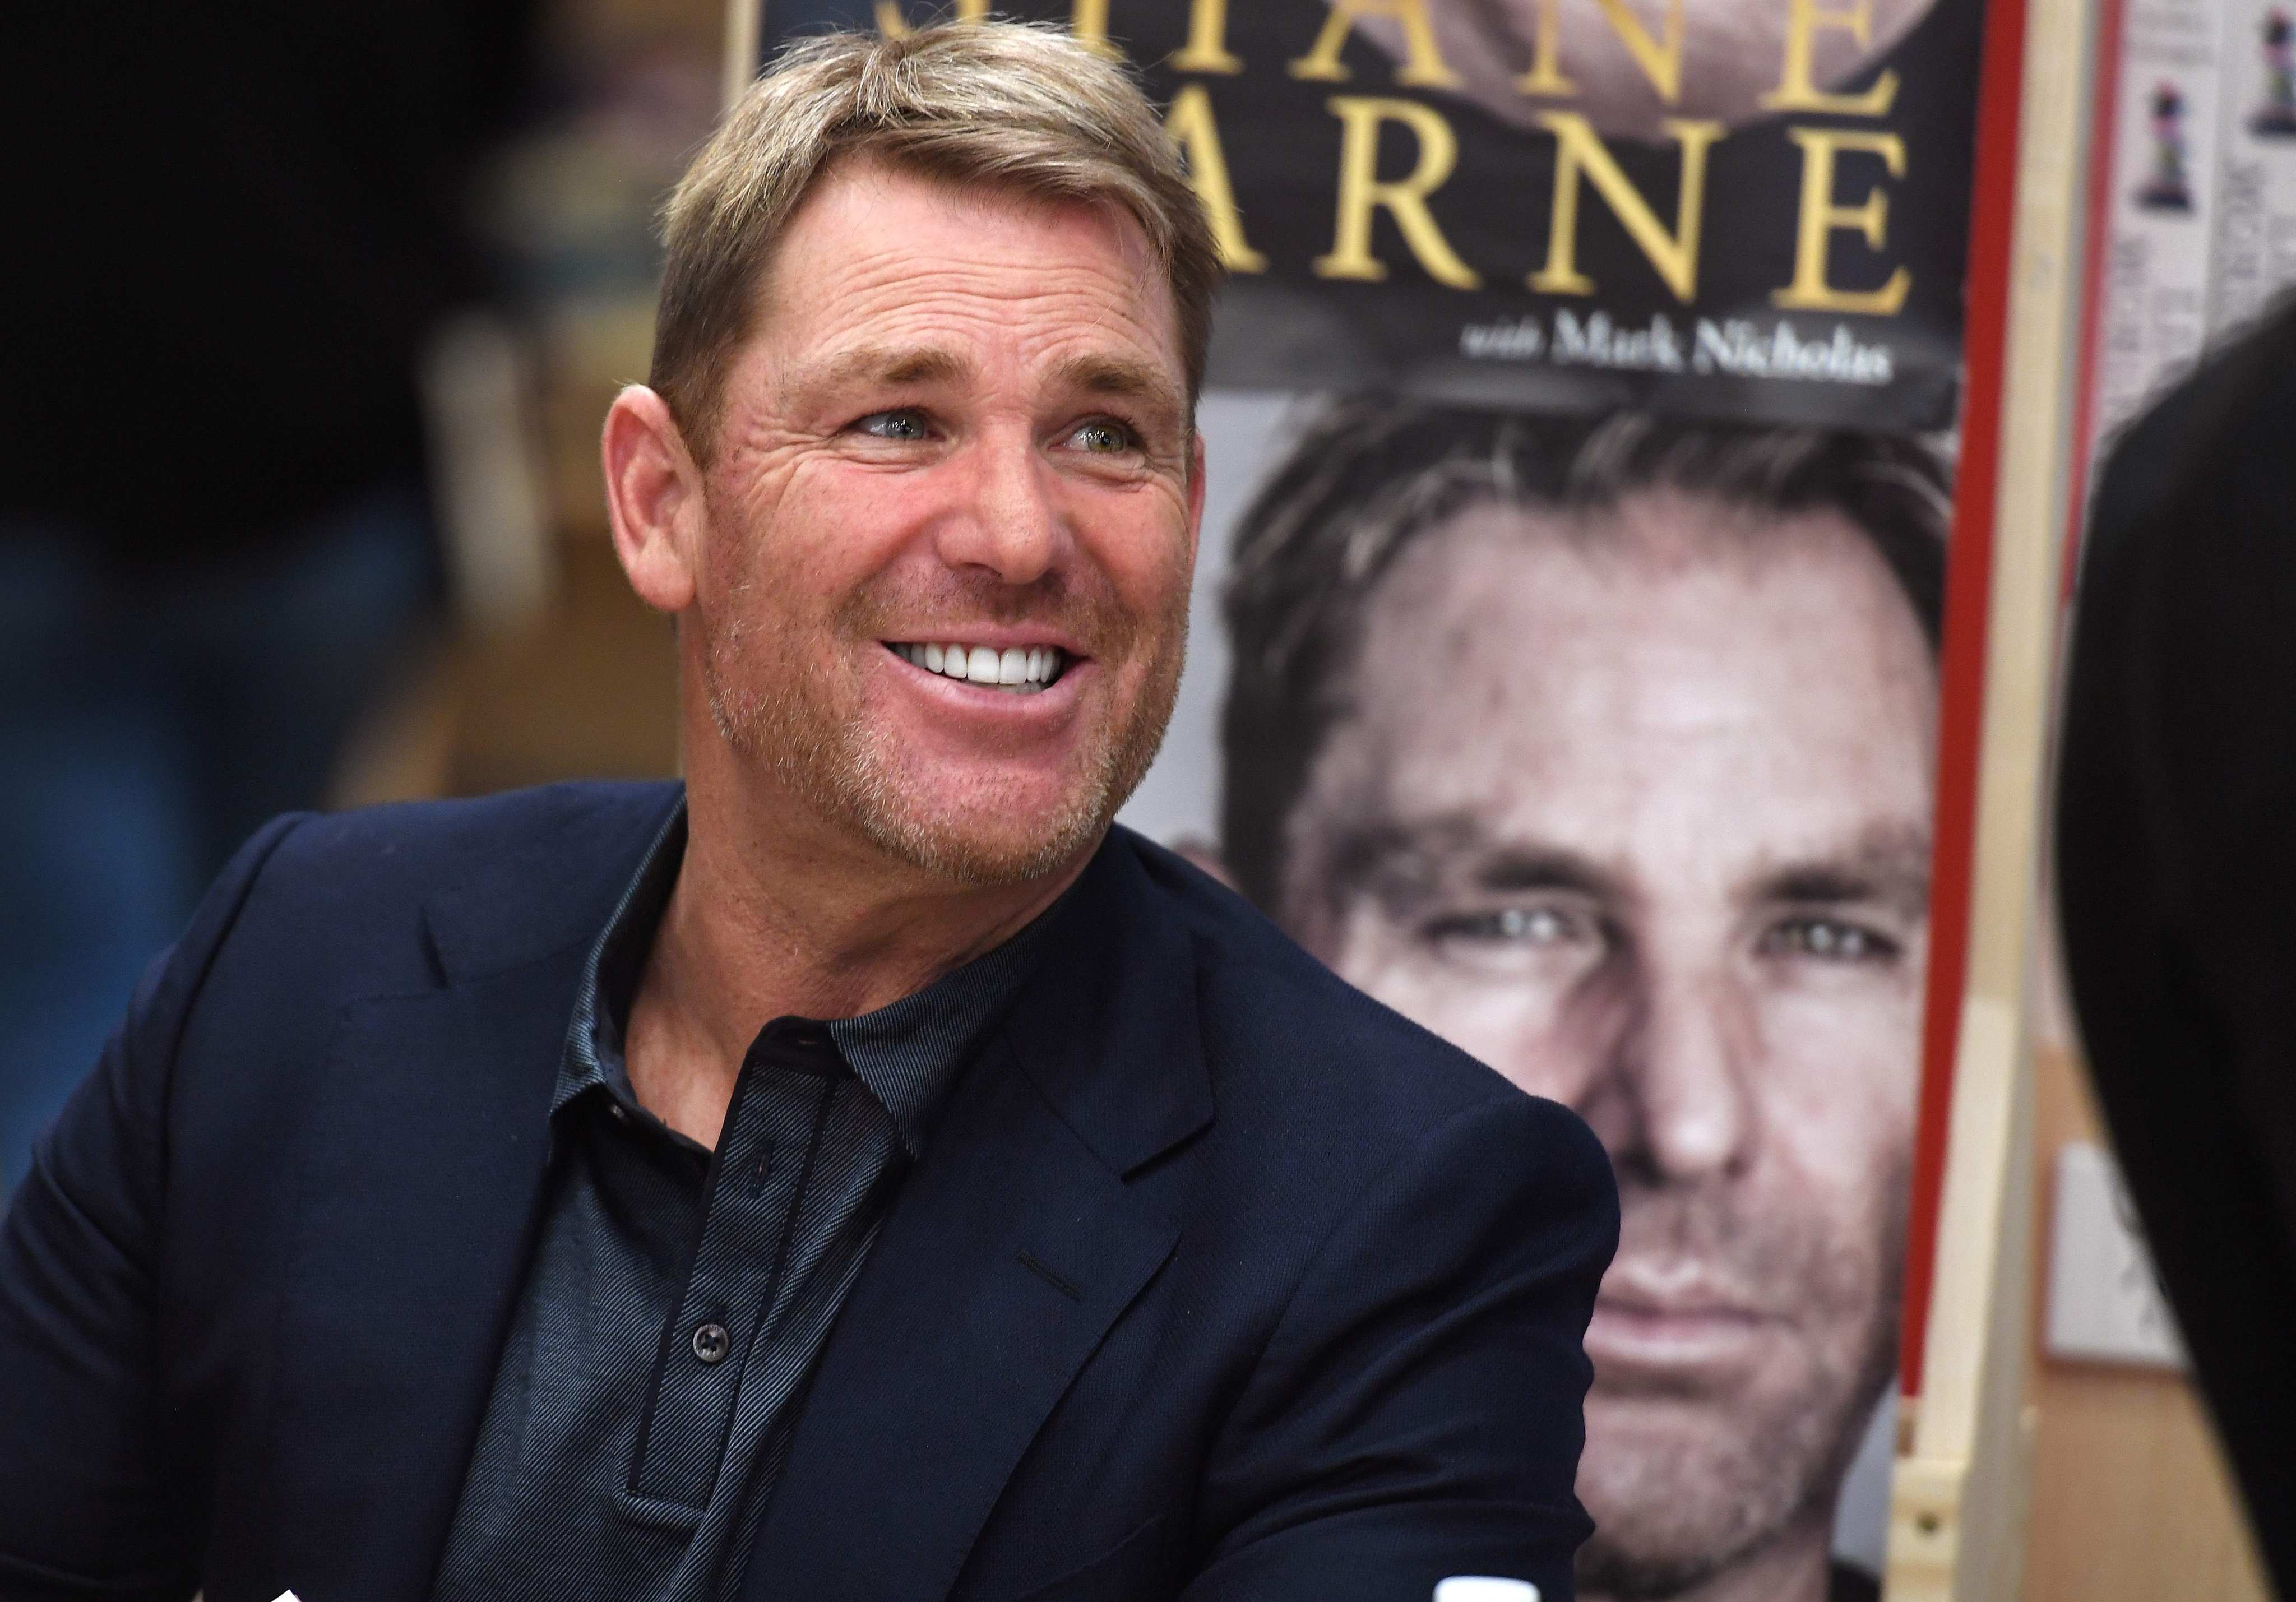 Daughters of the late Australian cricketing great Shane Warne are unhappy about the planned release of a film about his life so soon after his death. Photo: AFP